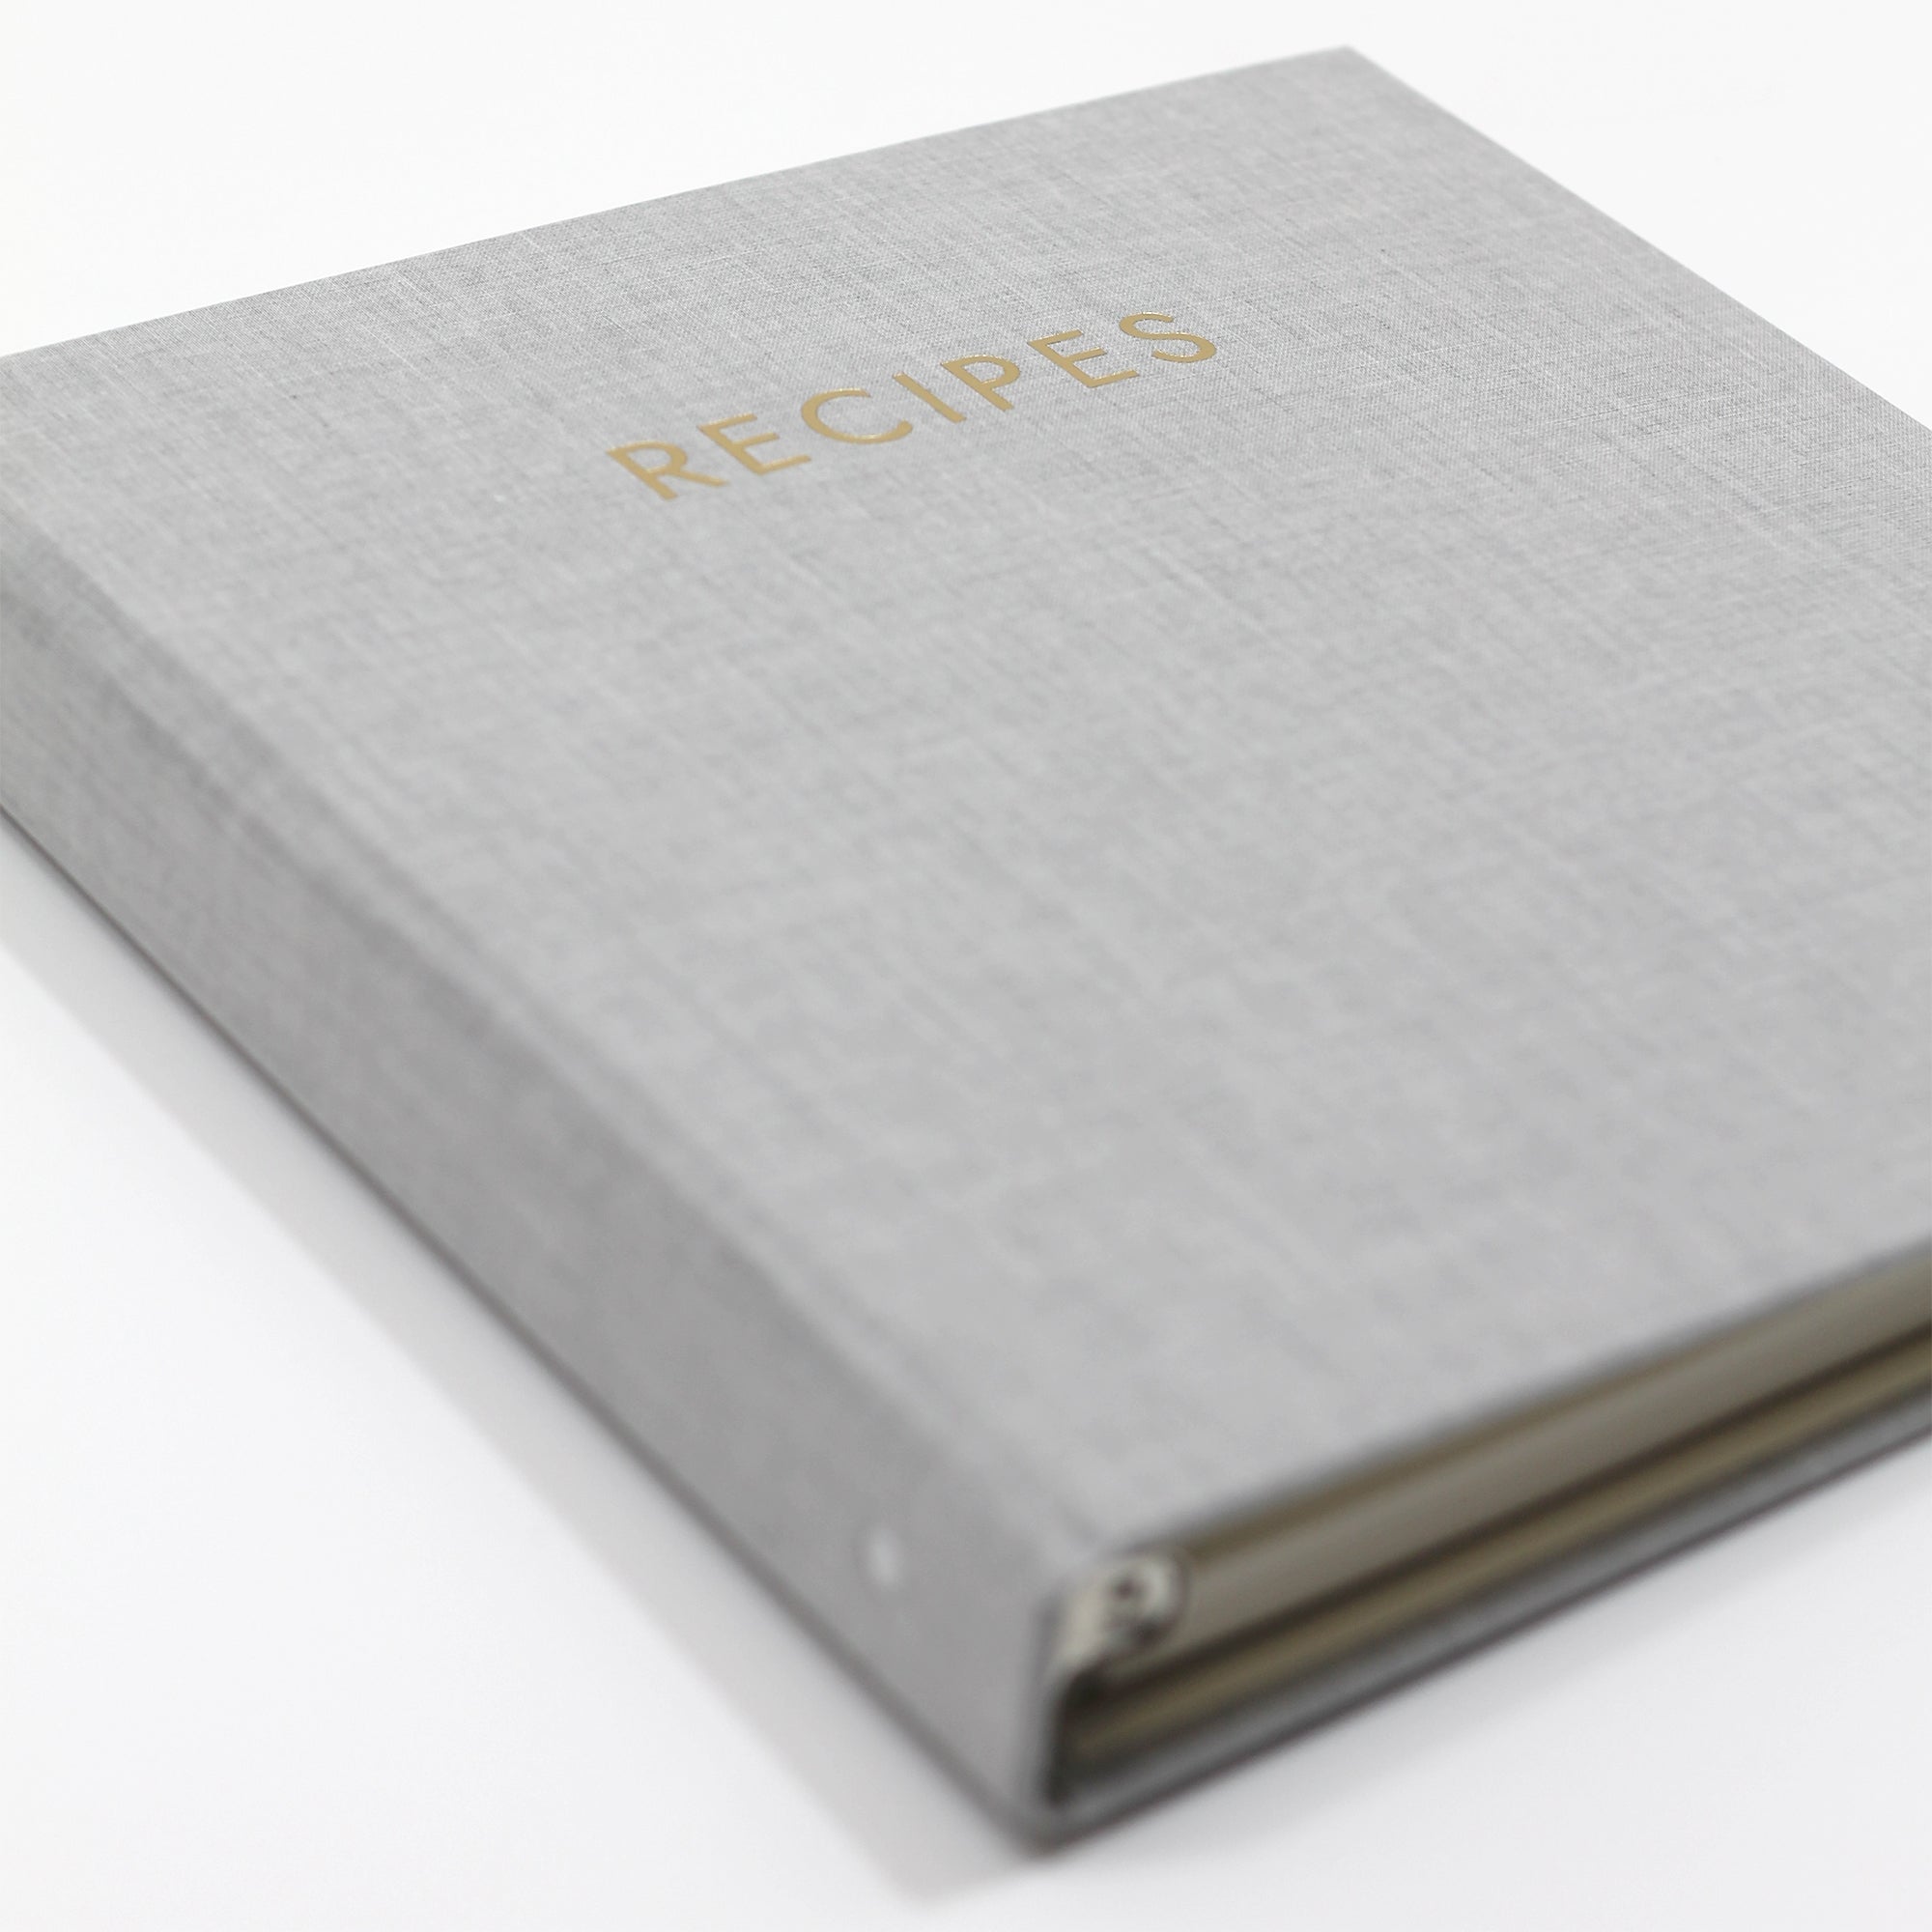 Recipe Journal Embossed with RECIPES covered with Natural Linen